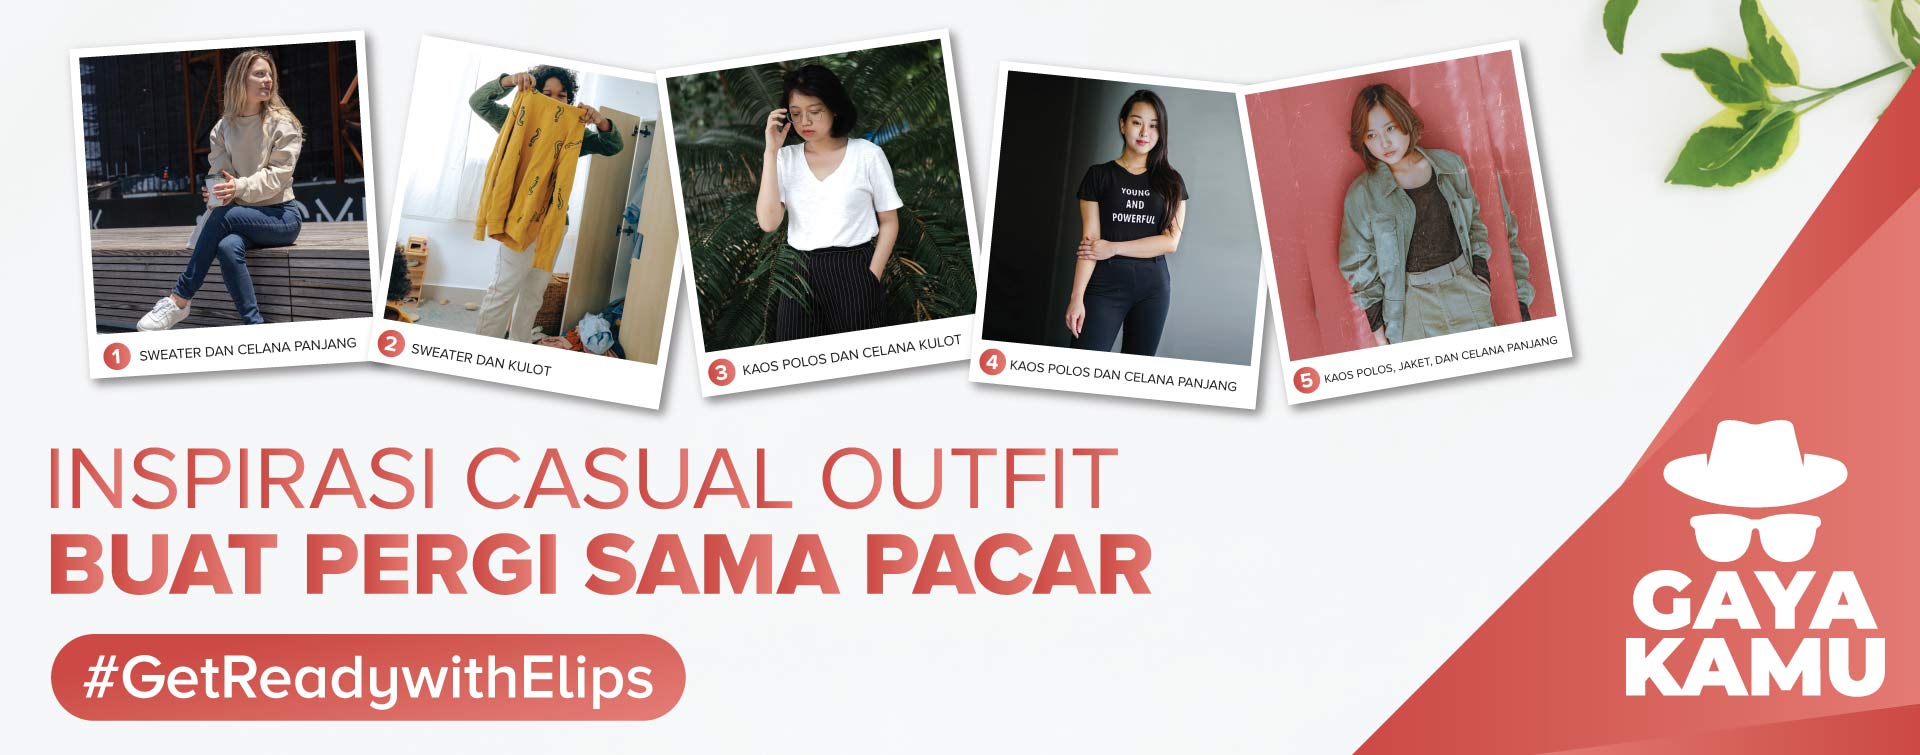 Inspirasi Casual Outfit with Elips